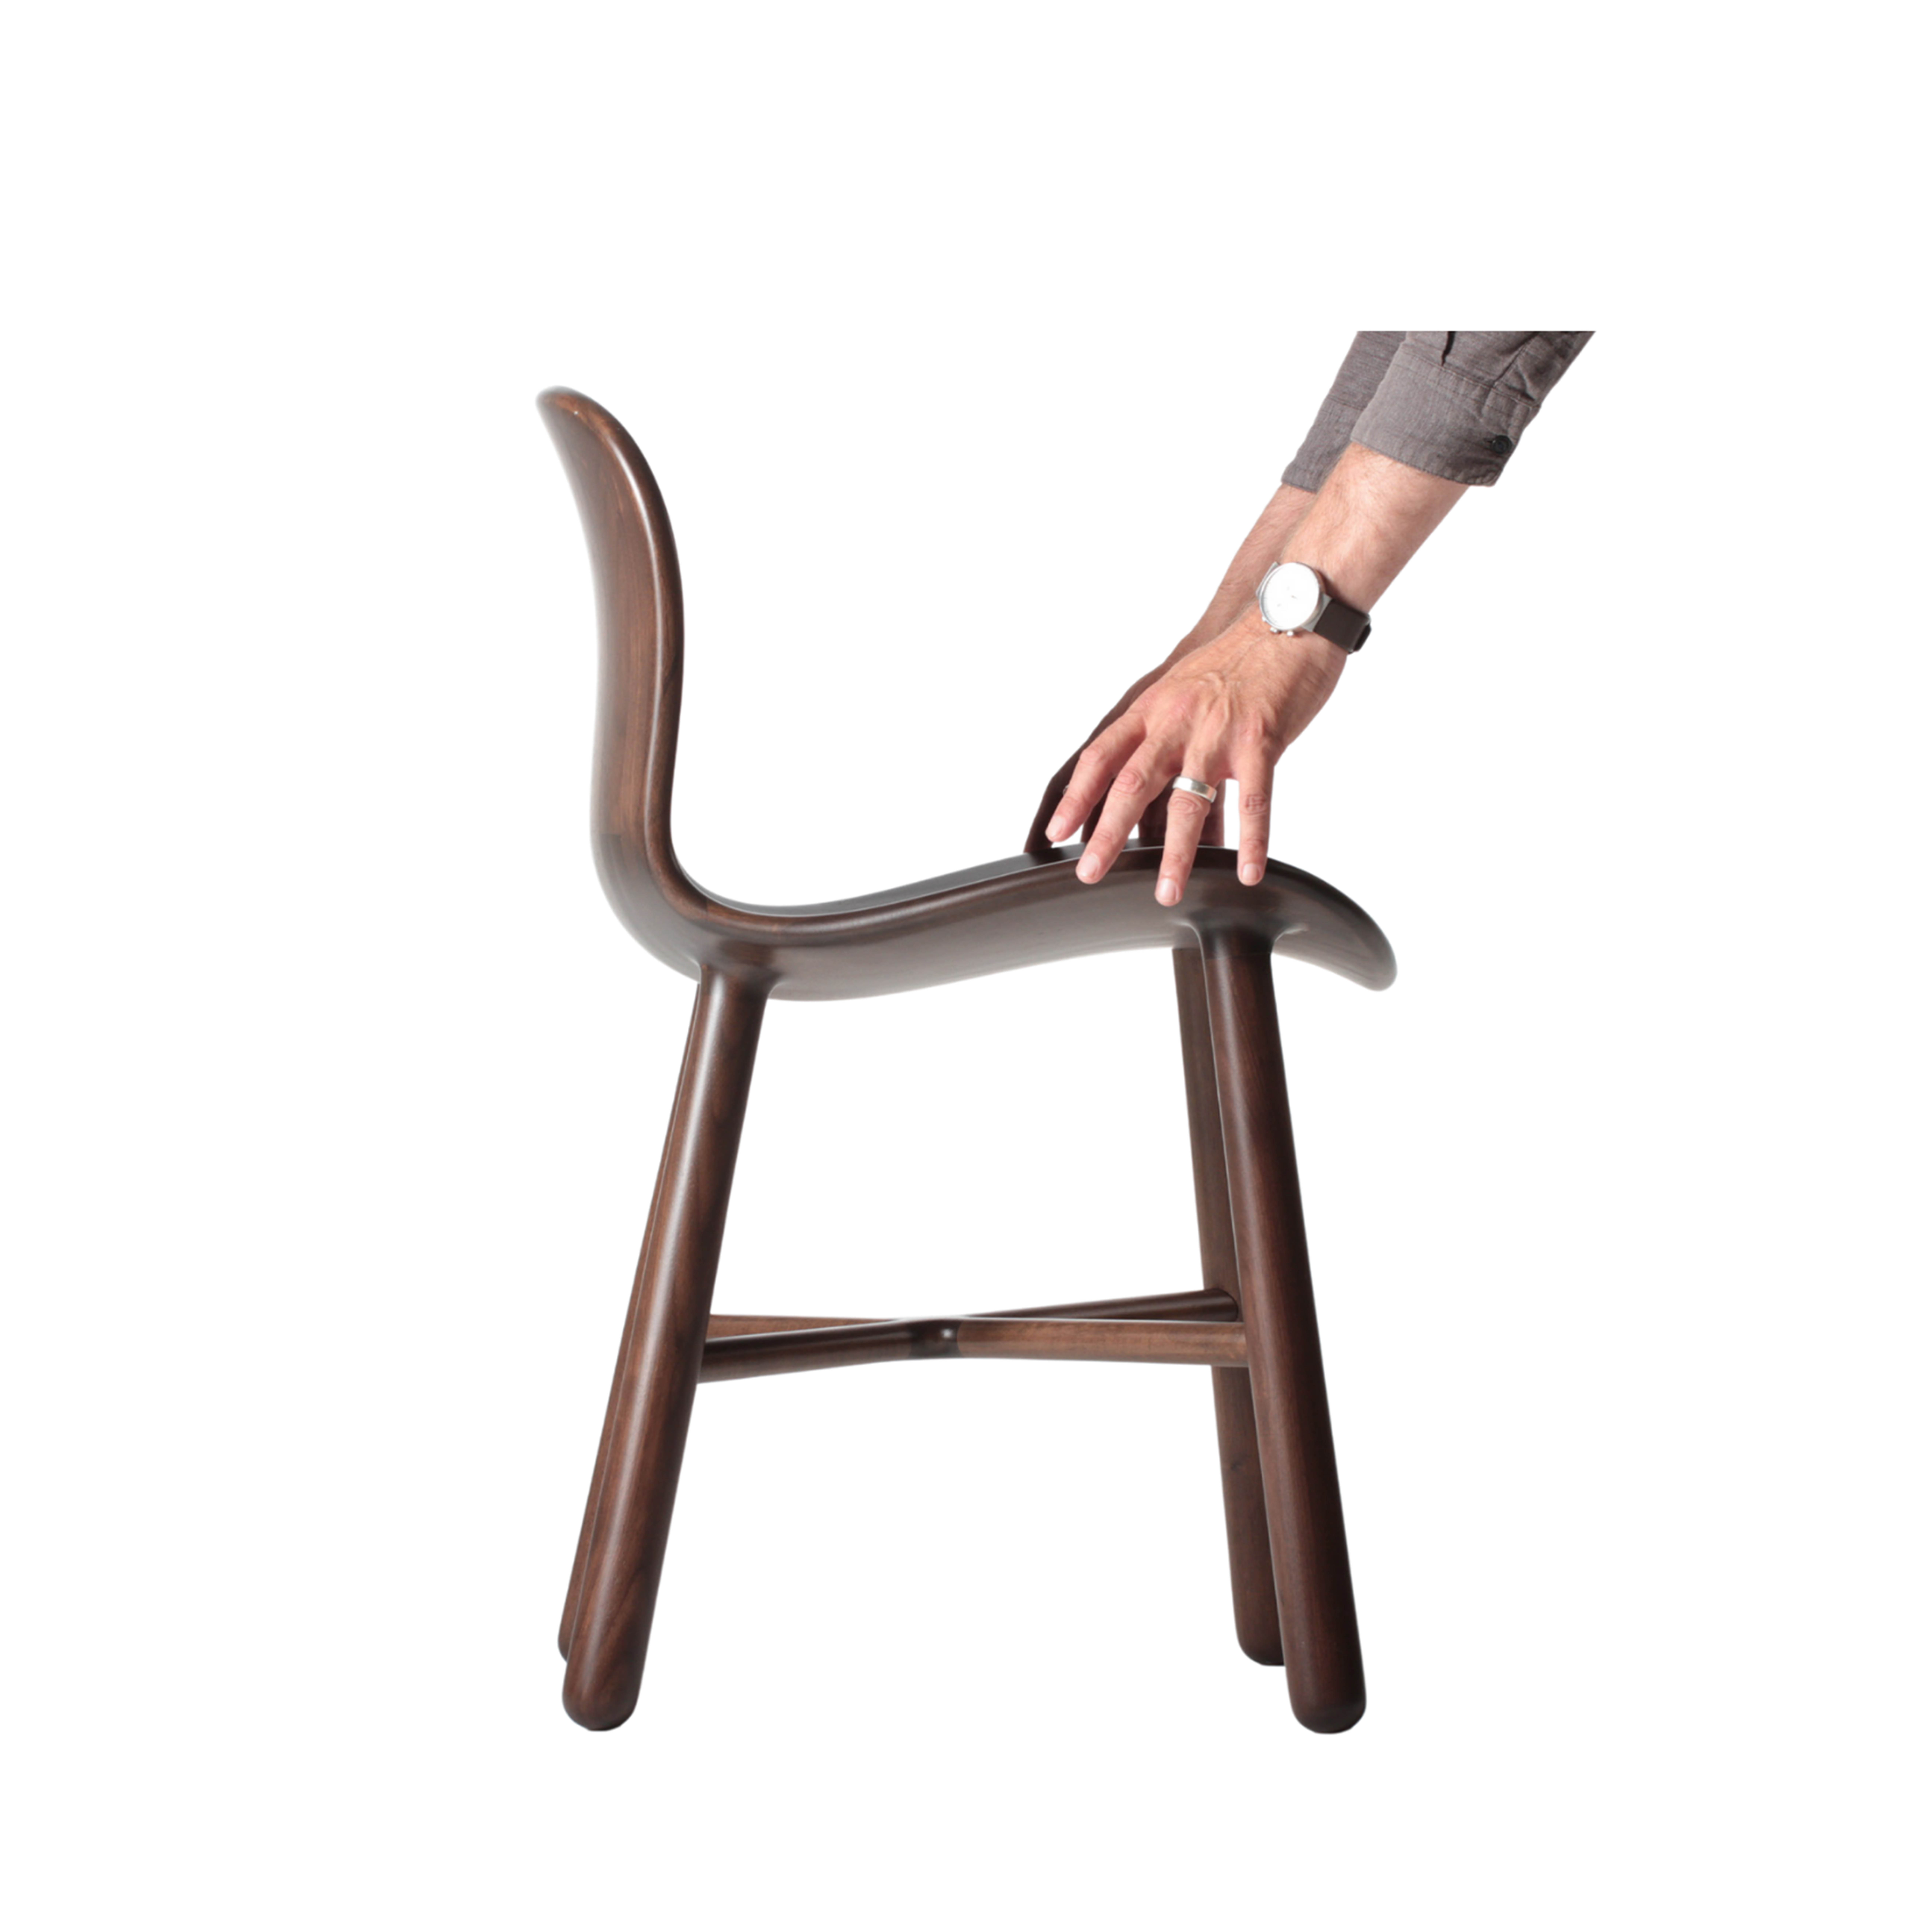 'One' chair